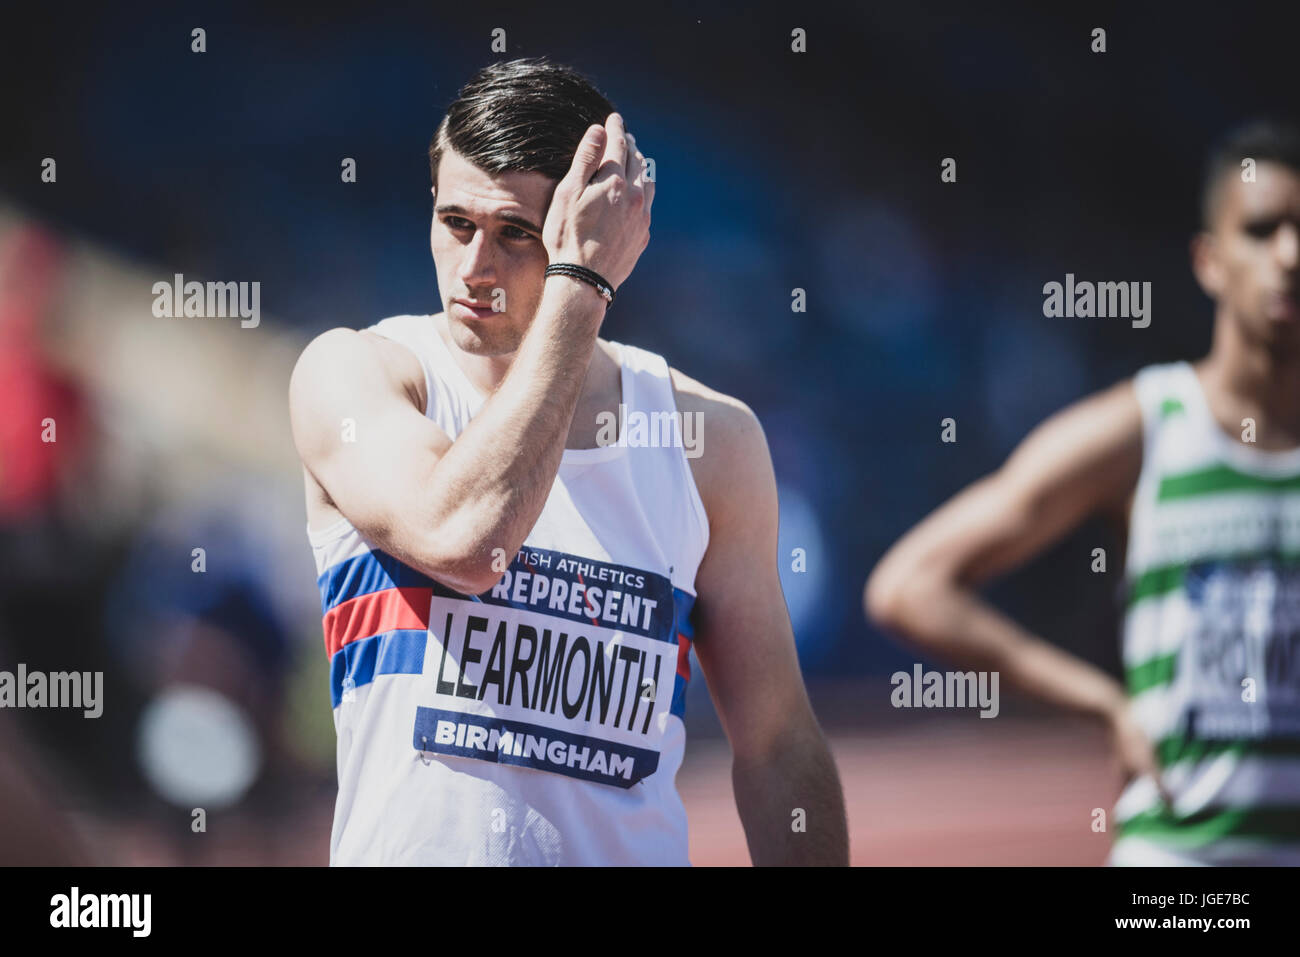 Guy Learmonth checks his hair before the 800m final at the British Athletics Championships and World Trials at Birmingham, United Kingdom on 2/7/2017 Stock Photo